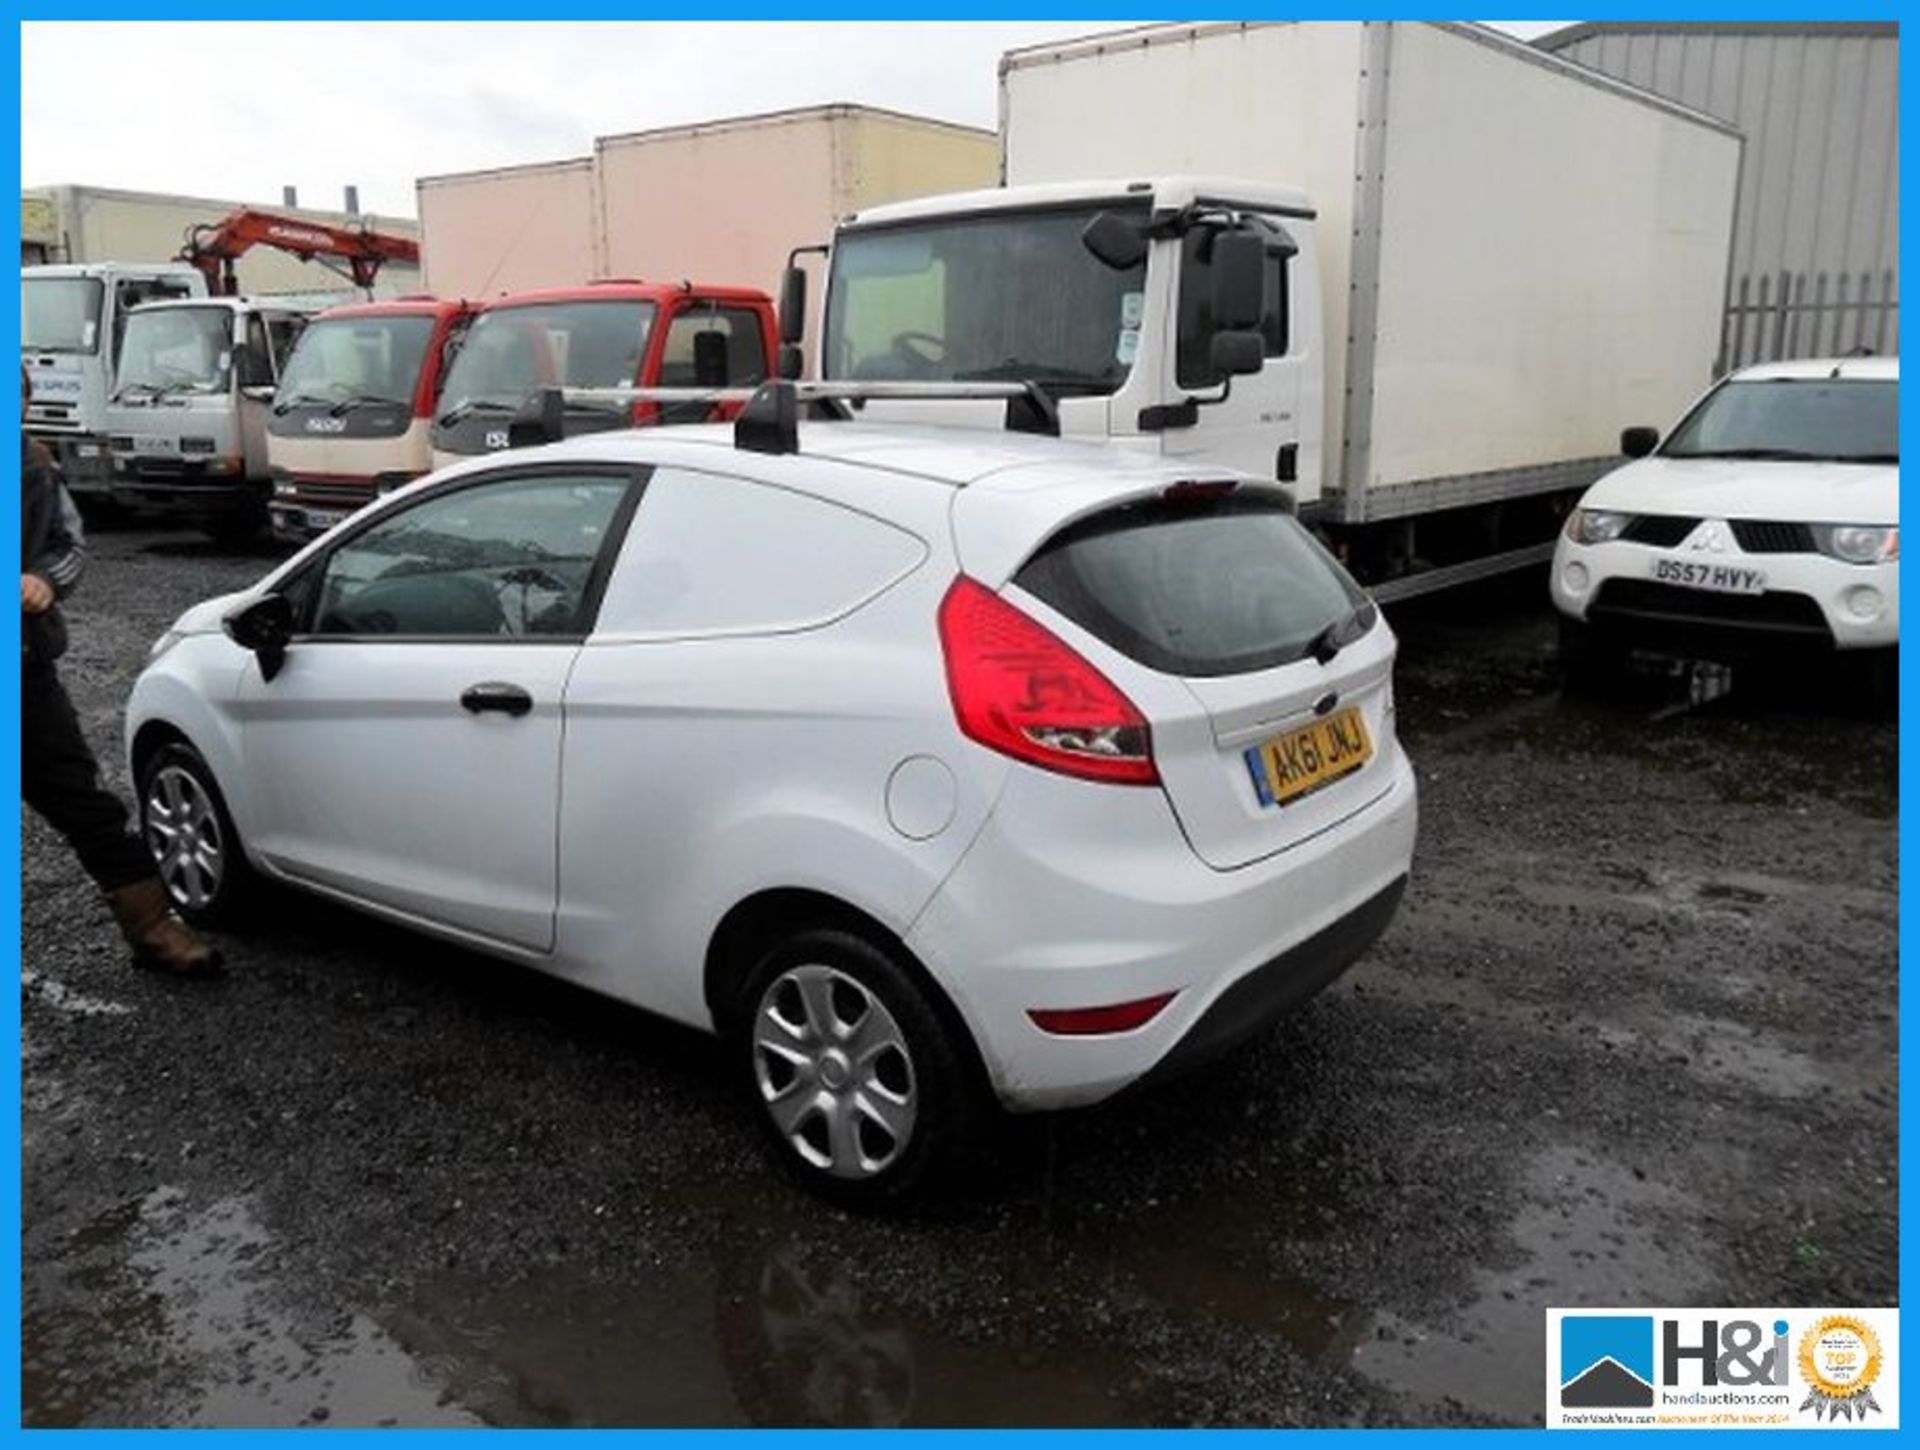 2011 FORD FIESTA BASE TDCI 1400, MOT: NOV 2016, MANUAL , SERVICE BOOK CAN BE SEEN , MILEAGE: 126,754 - Image 6 of 7